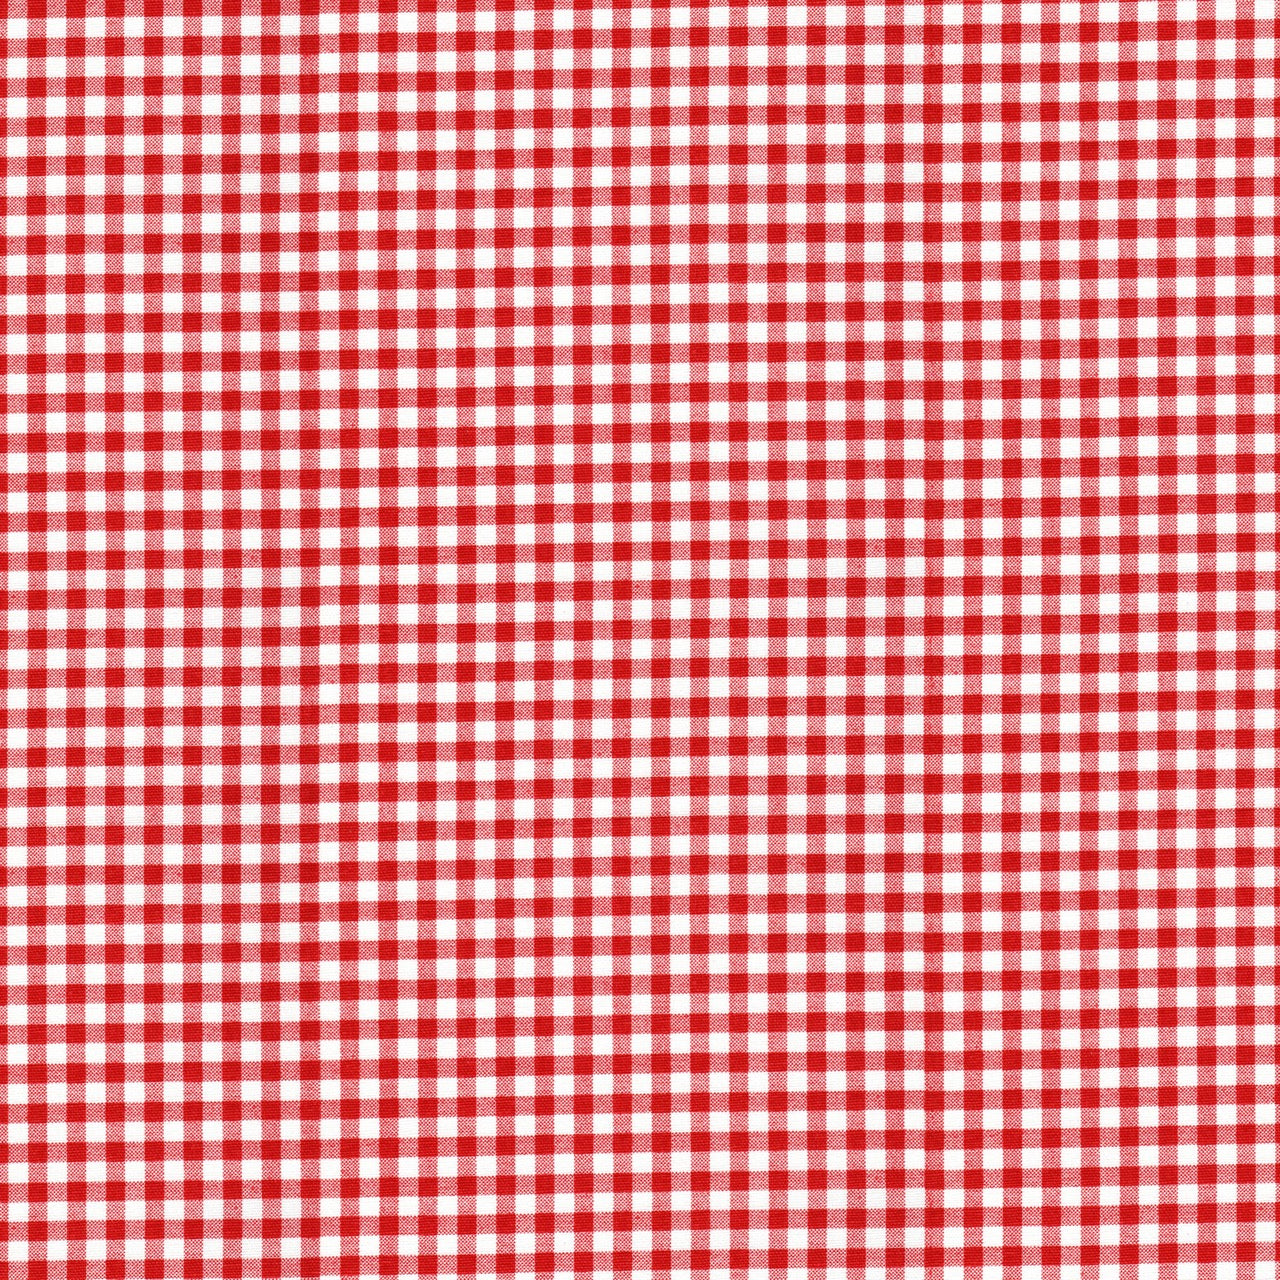 Pillow Sham in Lipstick Red Large Gingham Check on White